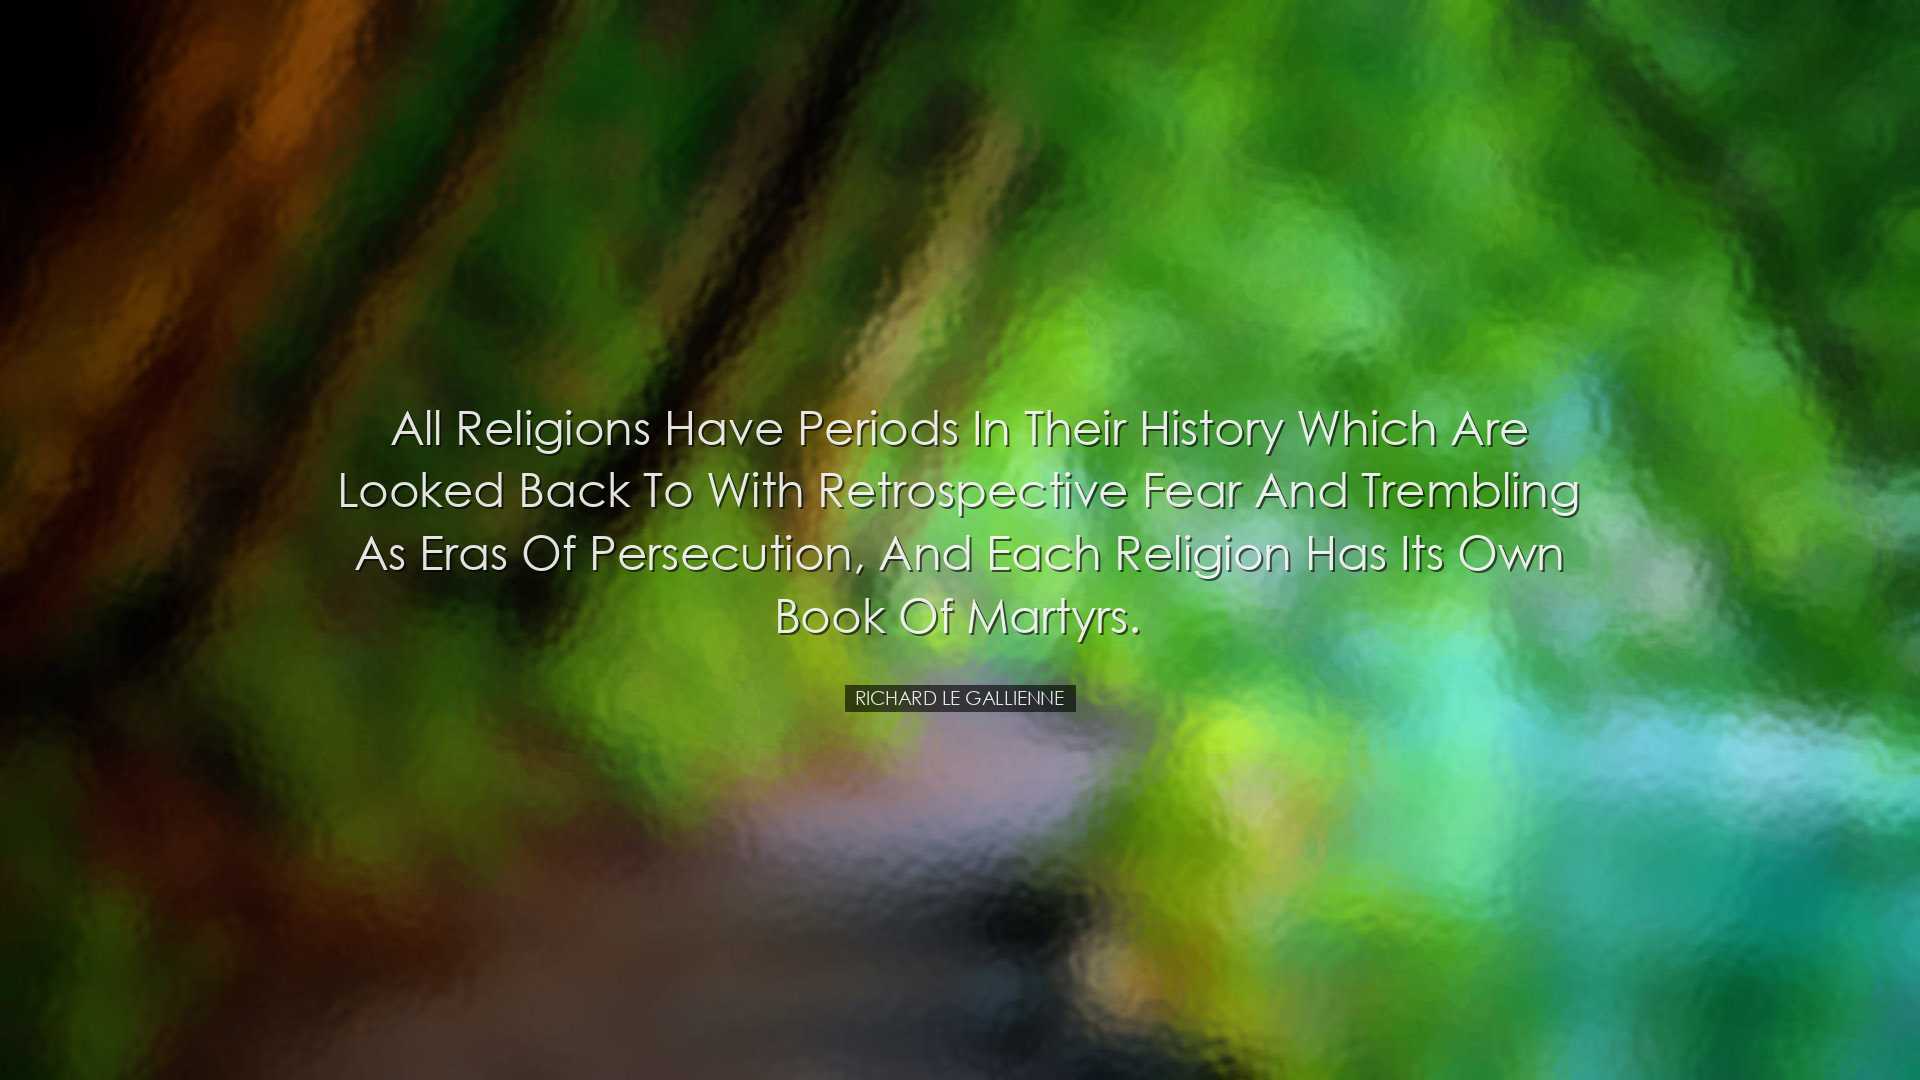 All religions have periods in their history which are looked back